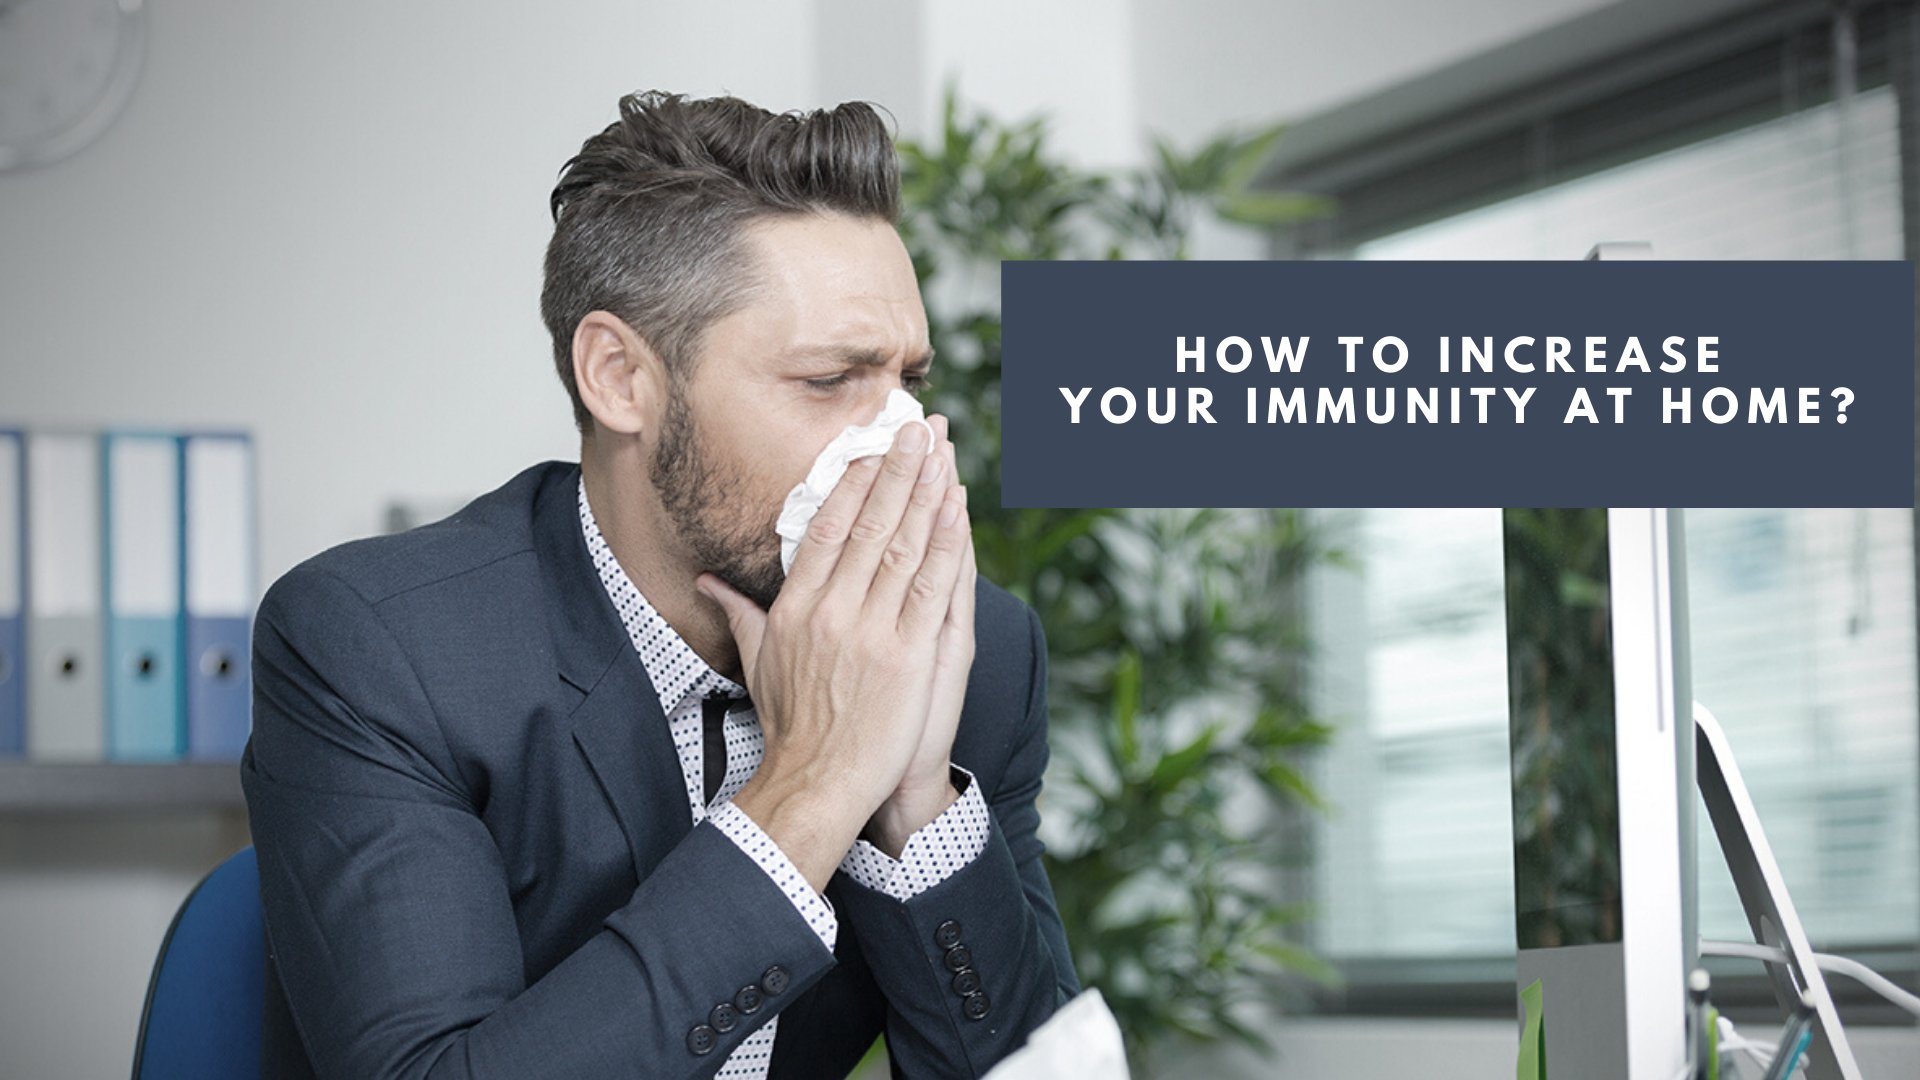 How To Increase your Immunity At home?